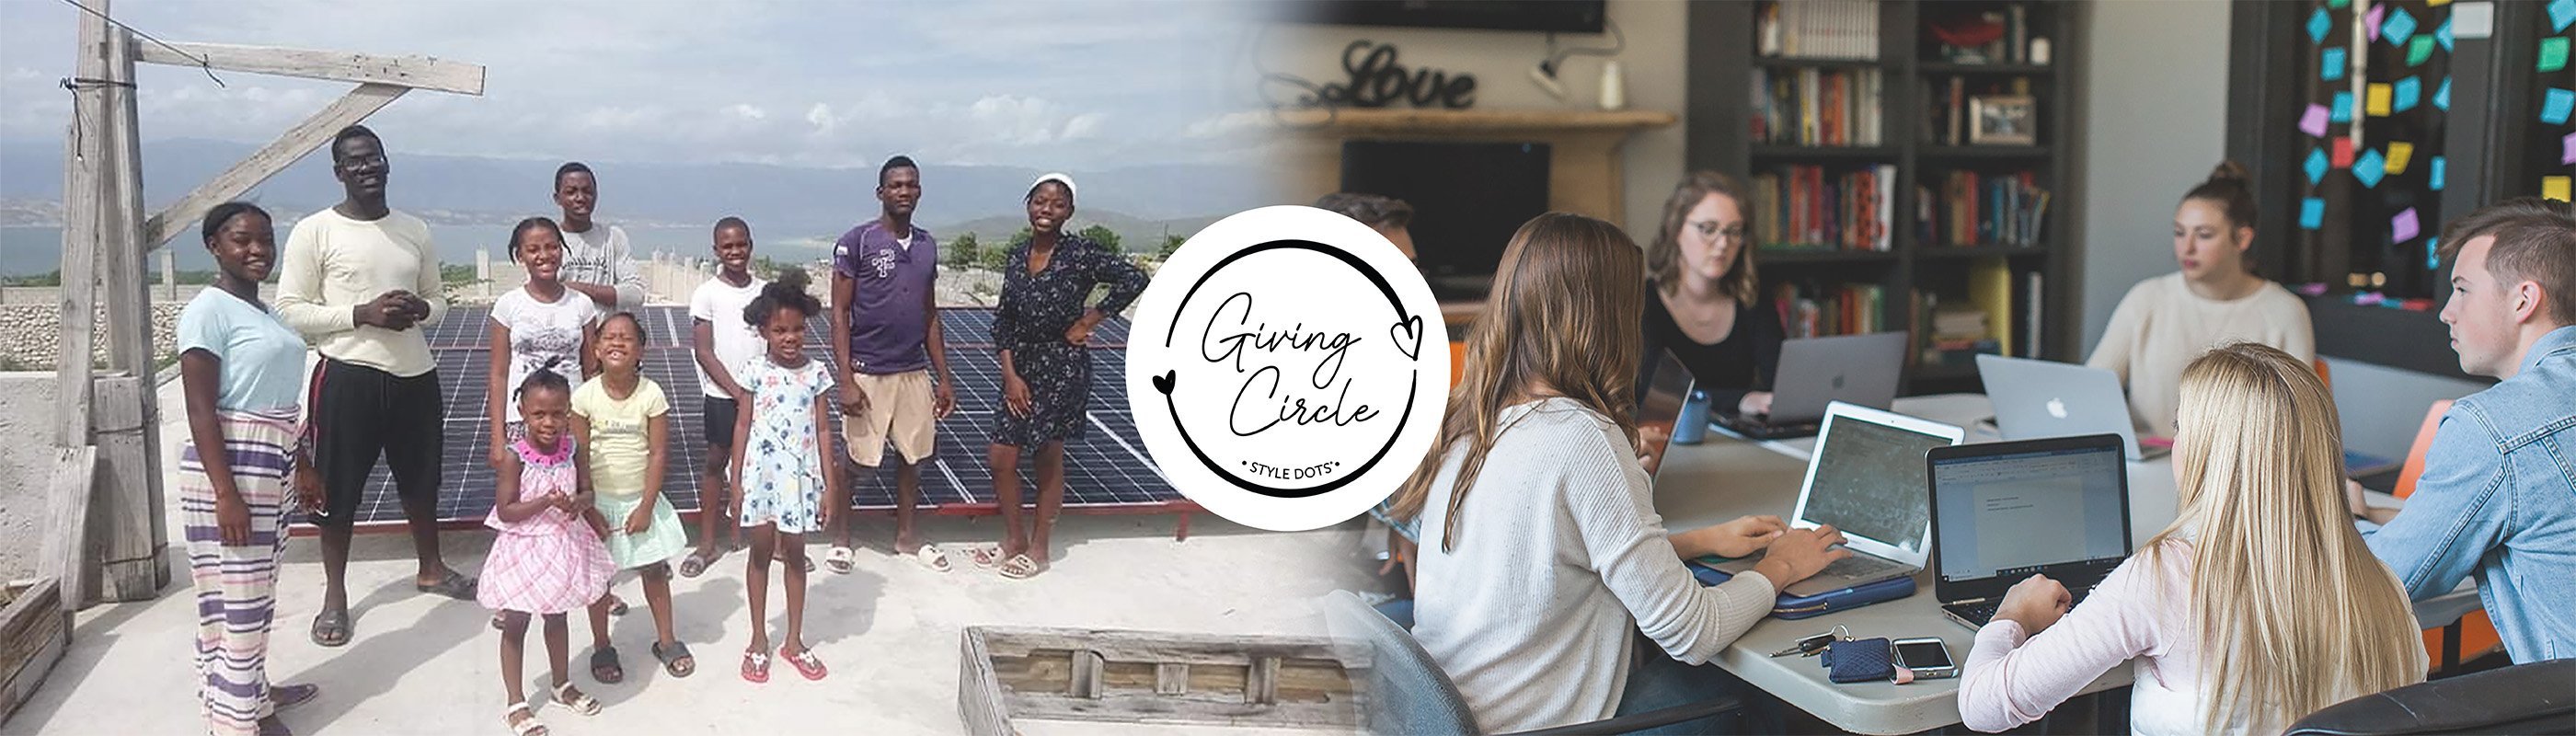 Style Dots supports charities with Giving Circle